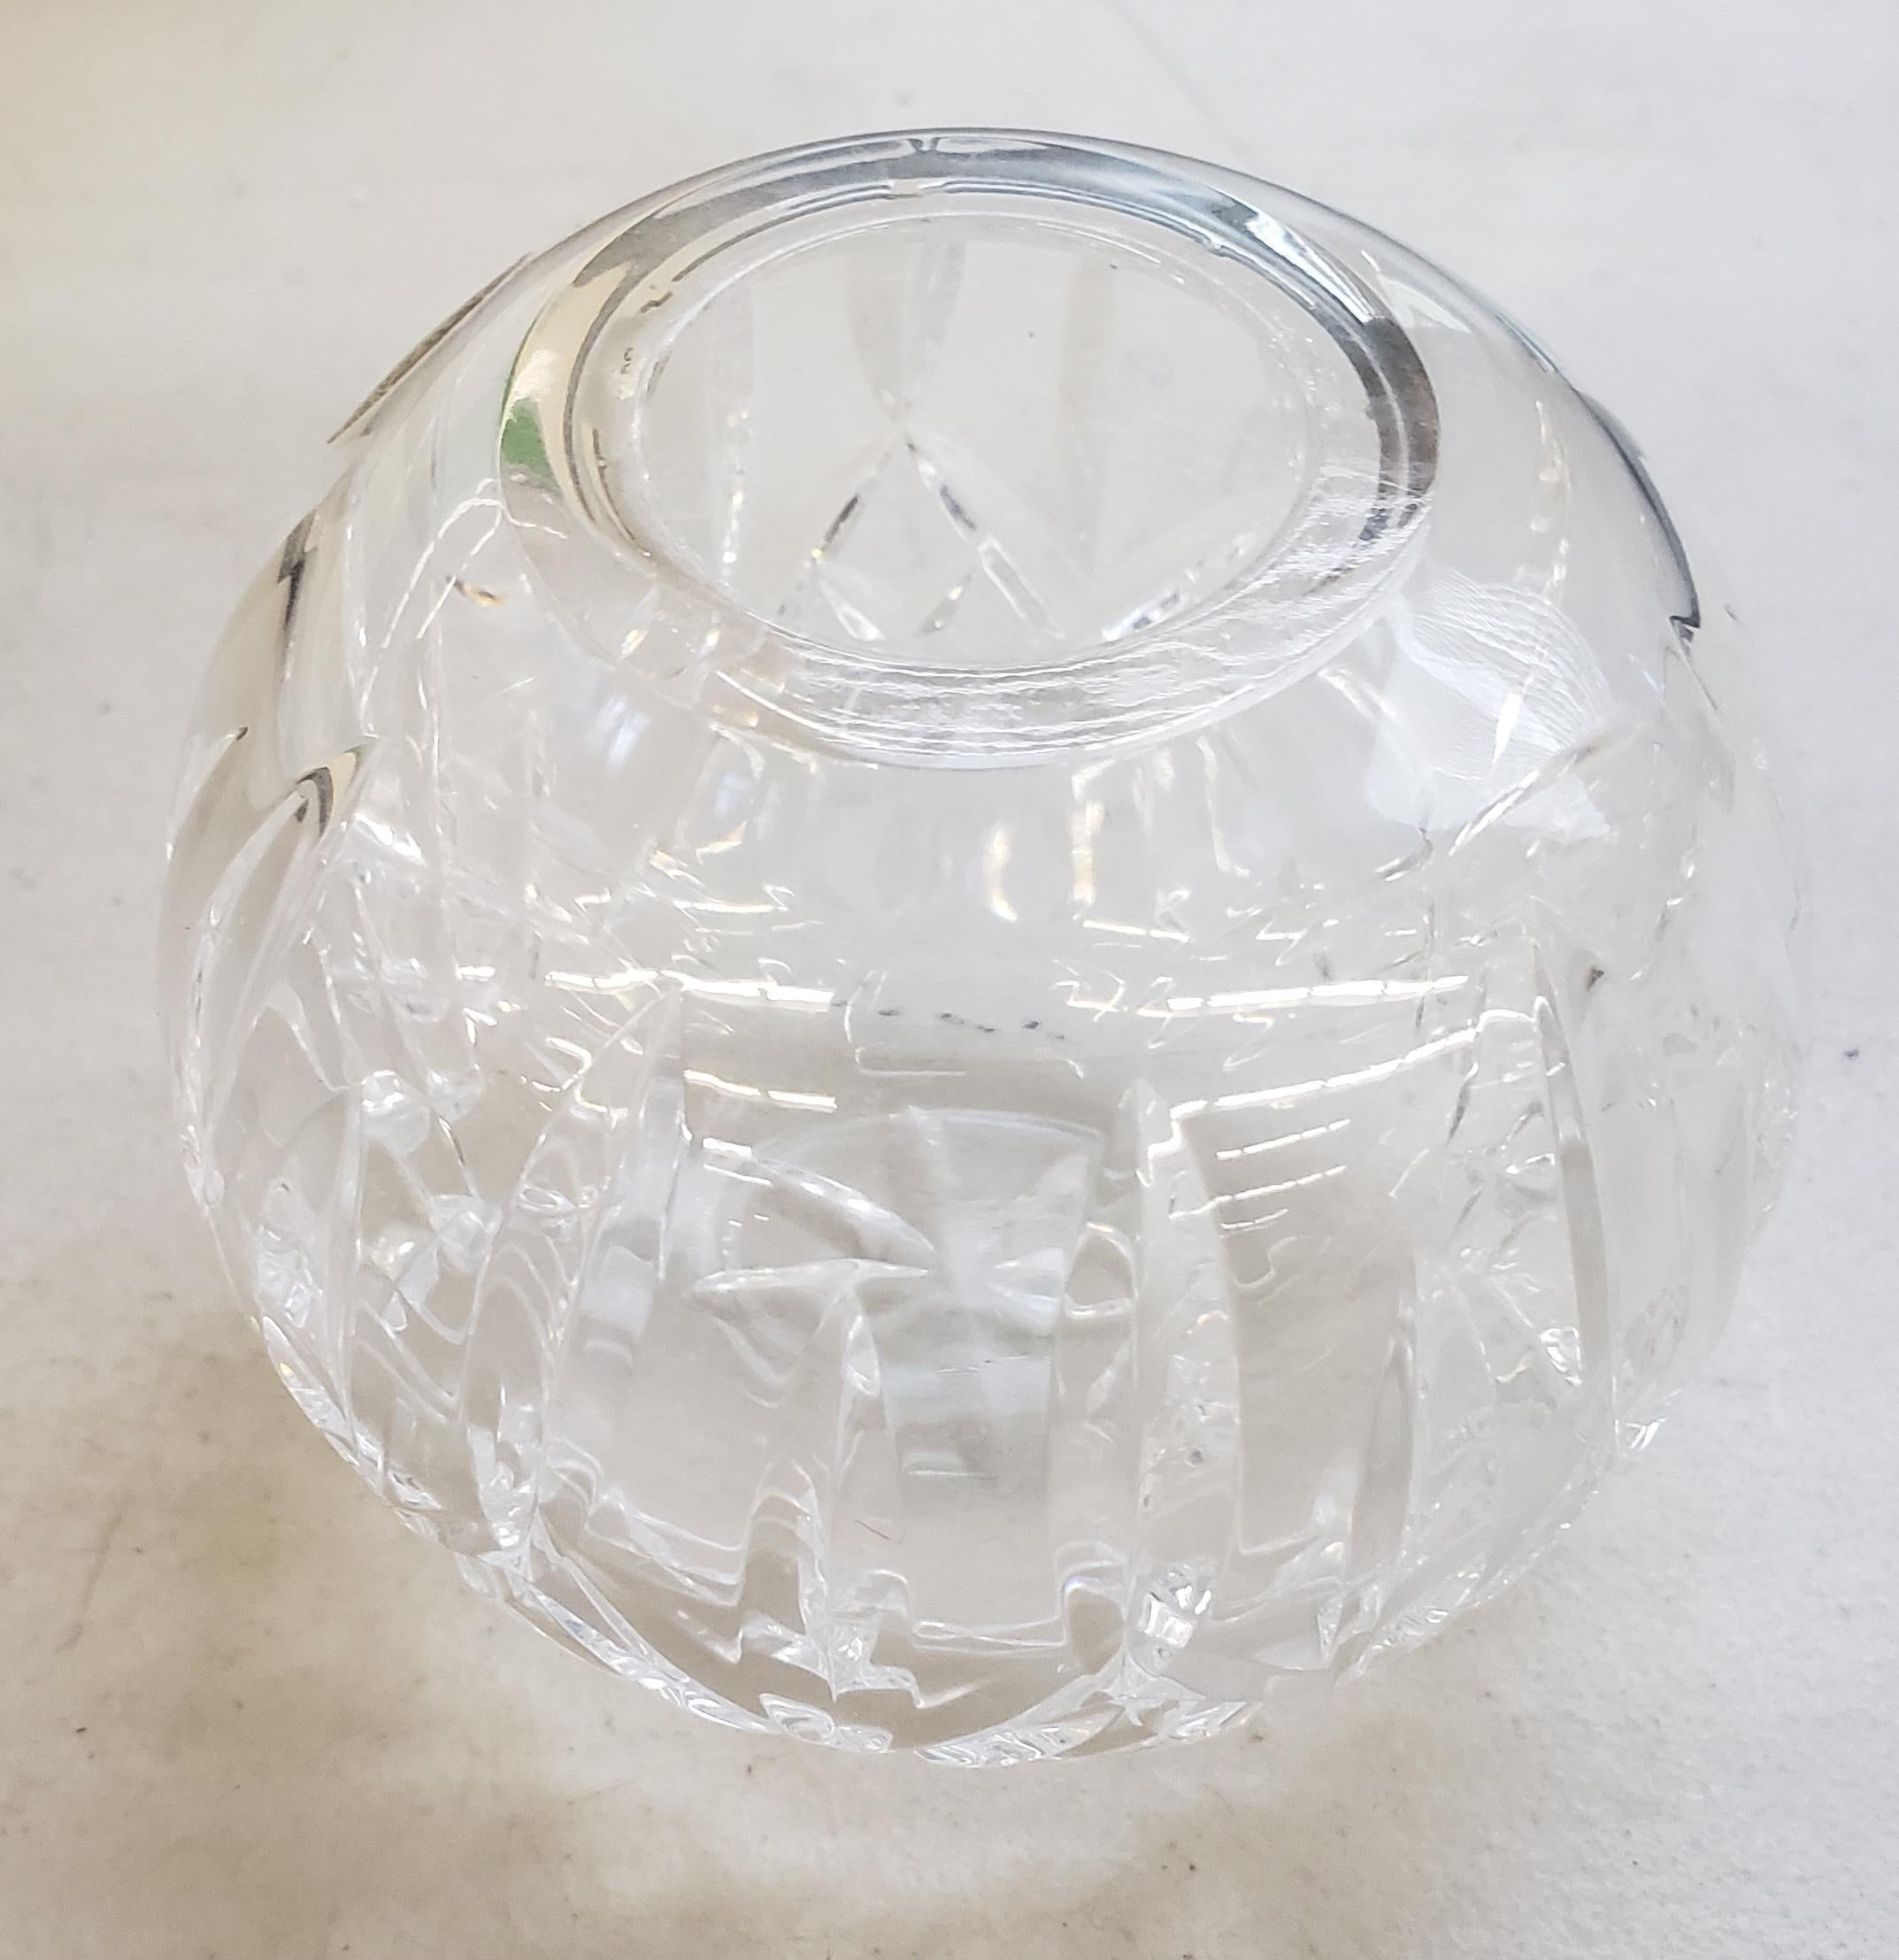 An Original, discontinued Waterford Cut Crystal Ball Candle Holder in excellent condition. Measures 4